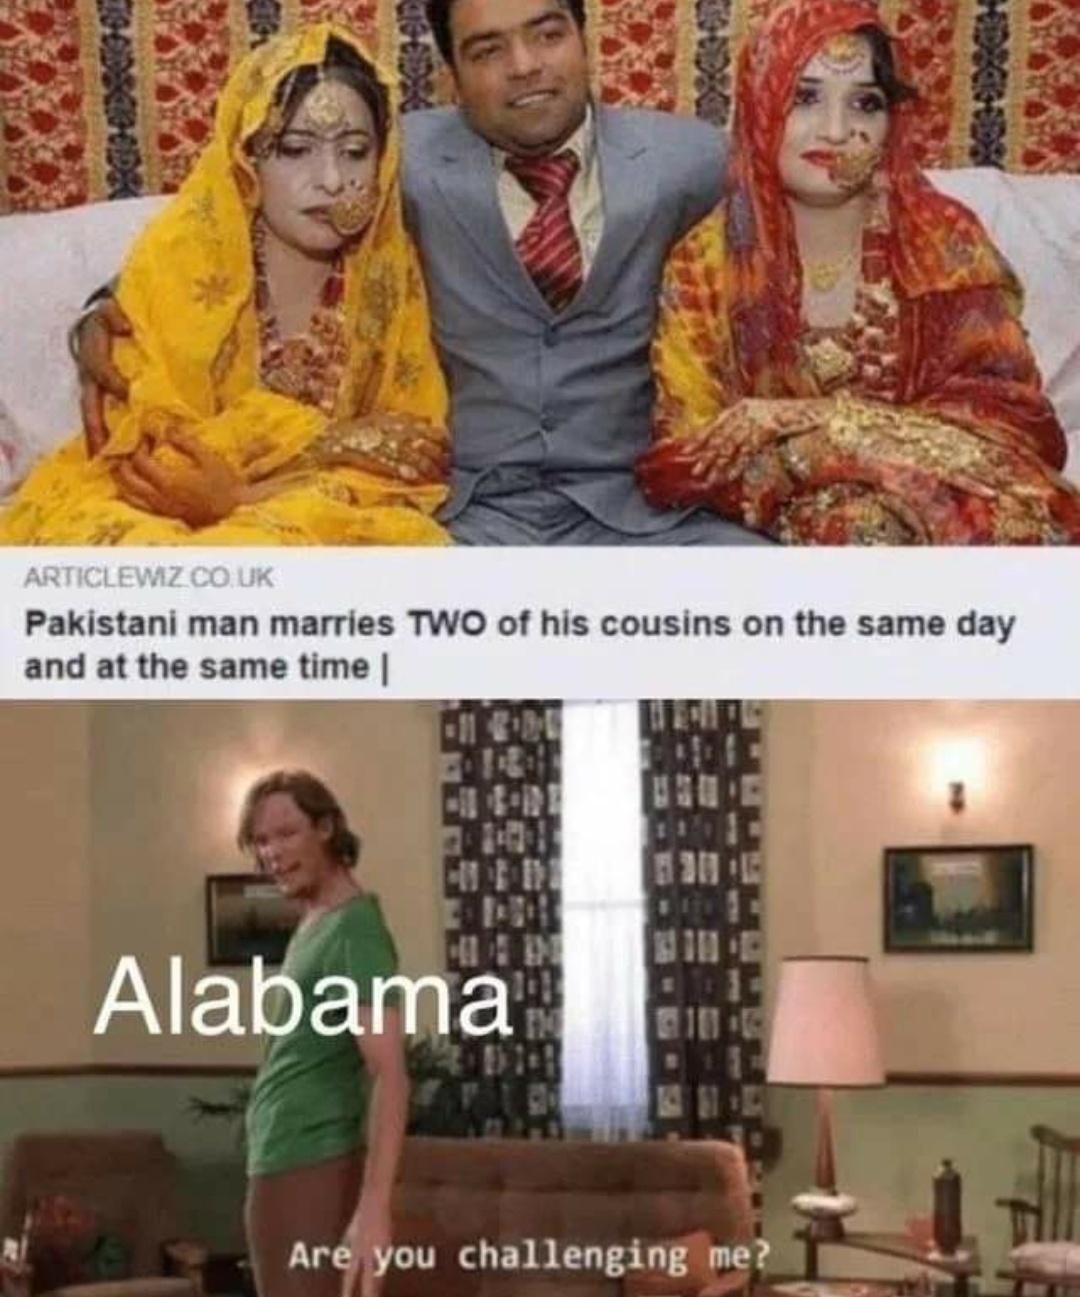 pakistani man marries two of his cousins - Skor Articlewz.Co.Uk Pakistani man marries Two of his cousins on the same day and at the same time 20 Alabama Are you challenging me?